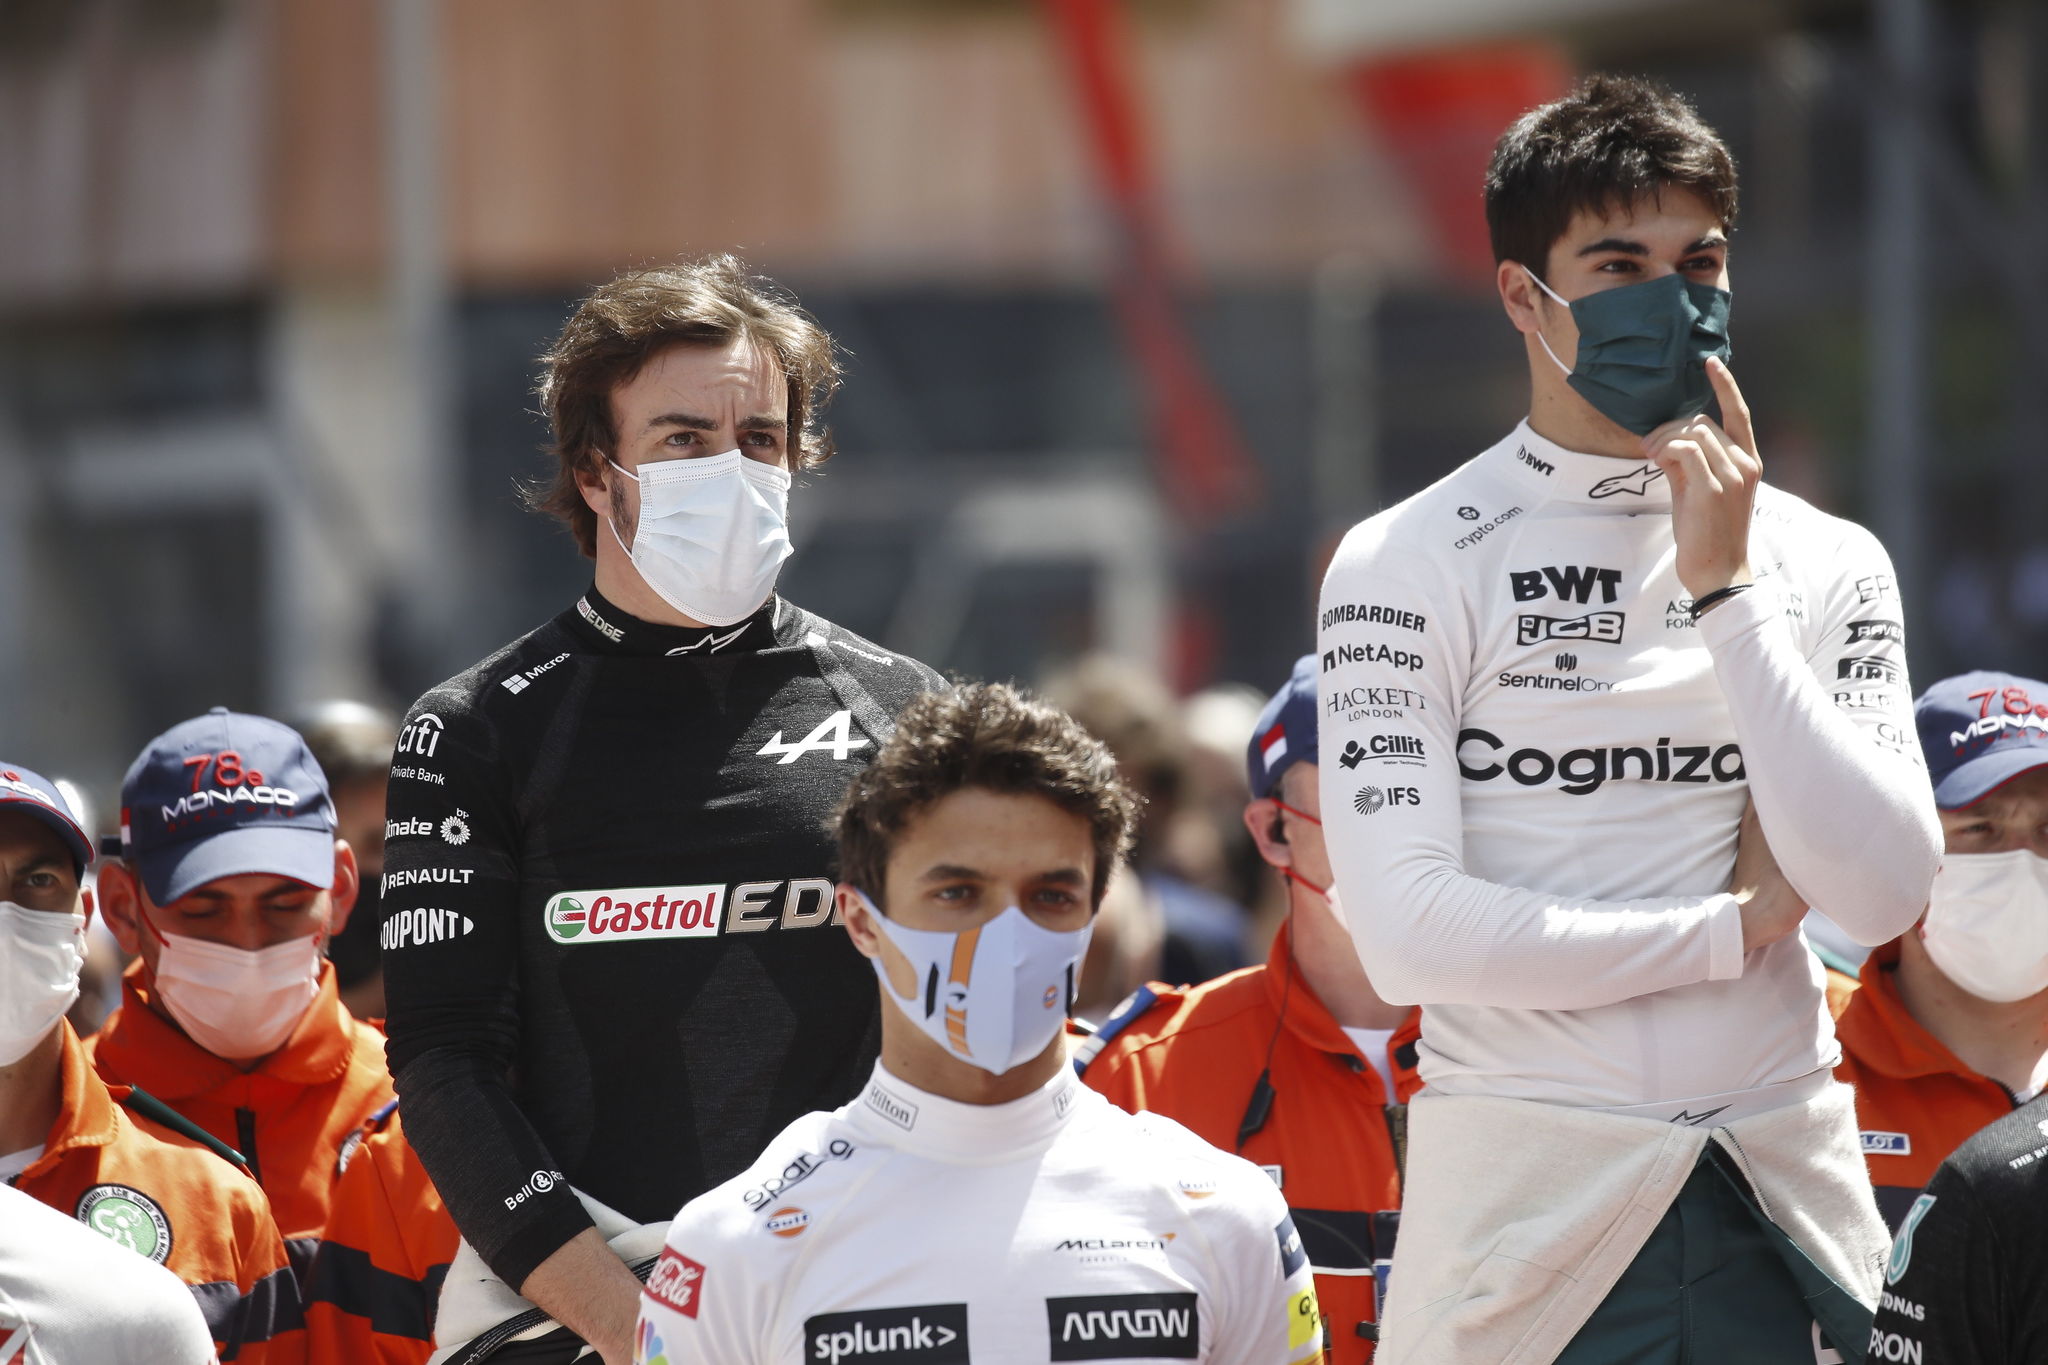 Monte Carlo (Monaco), 23/05/2021.- Spanish Formula One driver lt;HIT gt;Fernando lt;/HIT gt; lt;HIT gt;Alonso lt;/HIT gt; of Alpine F1 Team (L) and Canadian Formula One driver Lance Stroll of Aston Martin Cognizant F1 Team (R) on the grid before the Formula One Grand Prix of Monaco at the Circuit de Monaco in Monte Carlo, 23 May 2021. (Frmula Uno) EFE/EPA/SEBASTIEN NOGIER / POOL